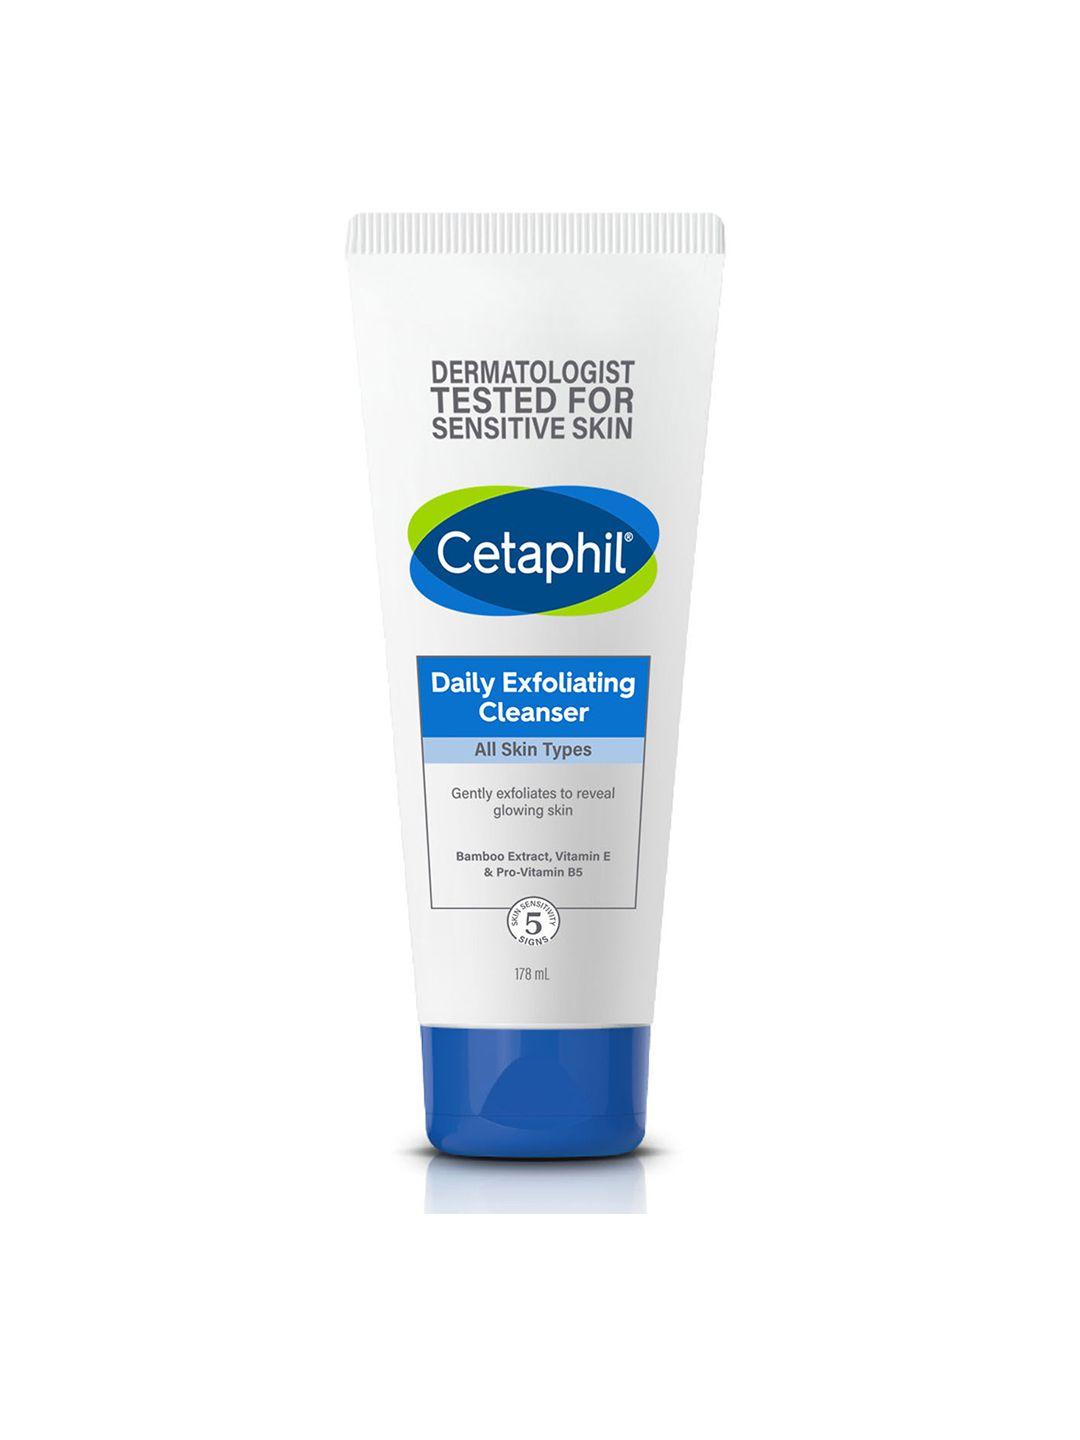 Cetaphil Daily Exfloliating Cleanser with Bamboo Extract & Vitamin E - 178ml